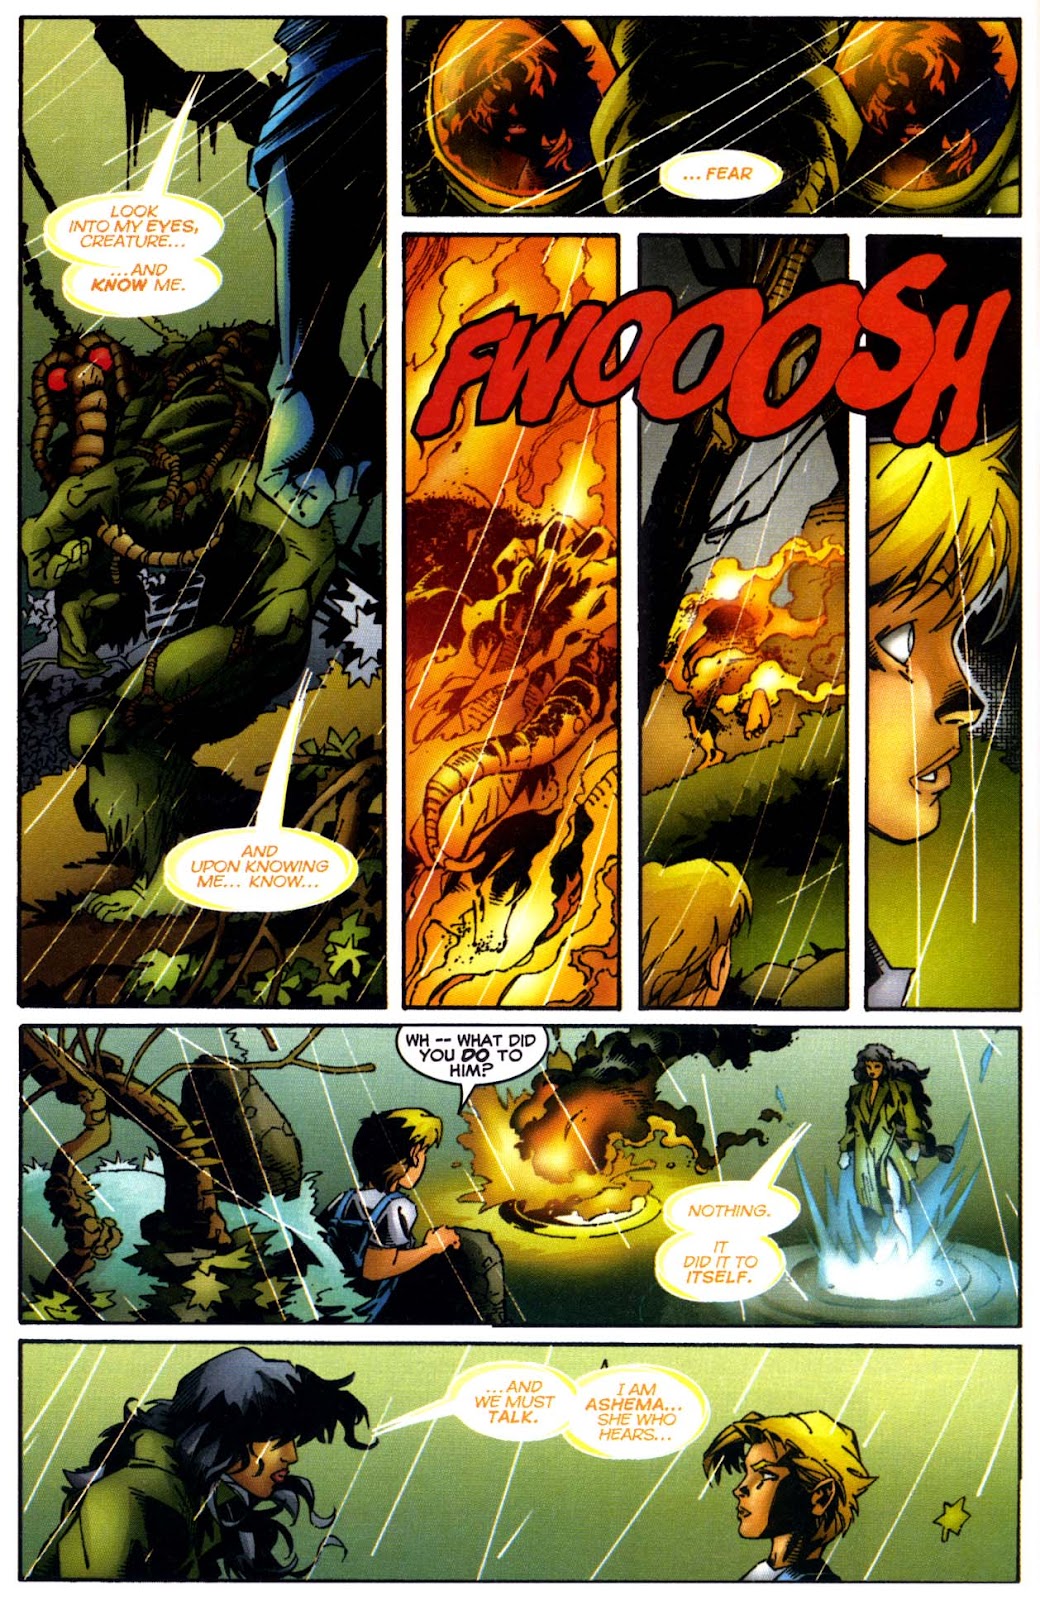 Heroes Reborn: The Return issue 1 - Page 22